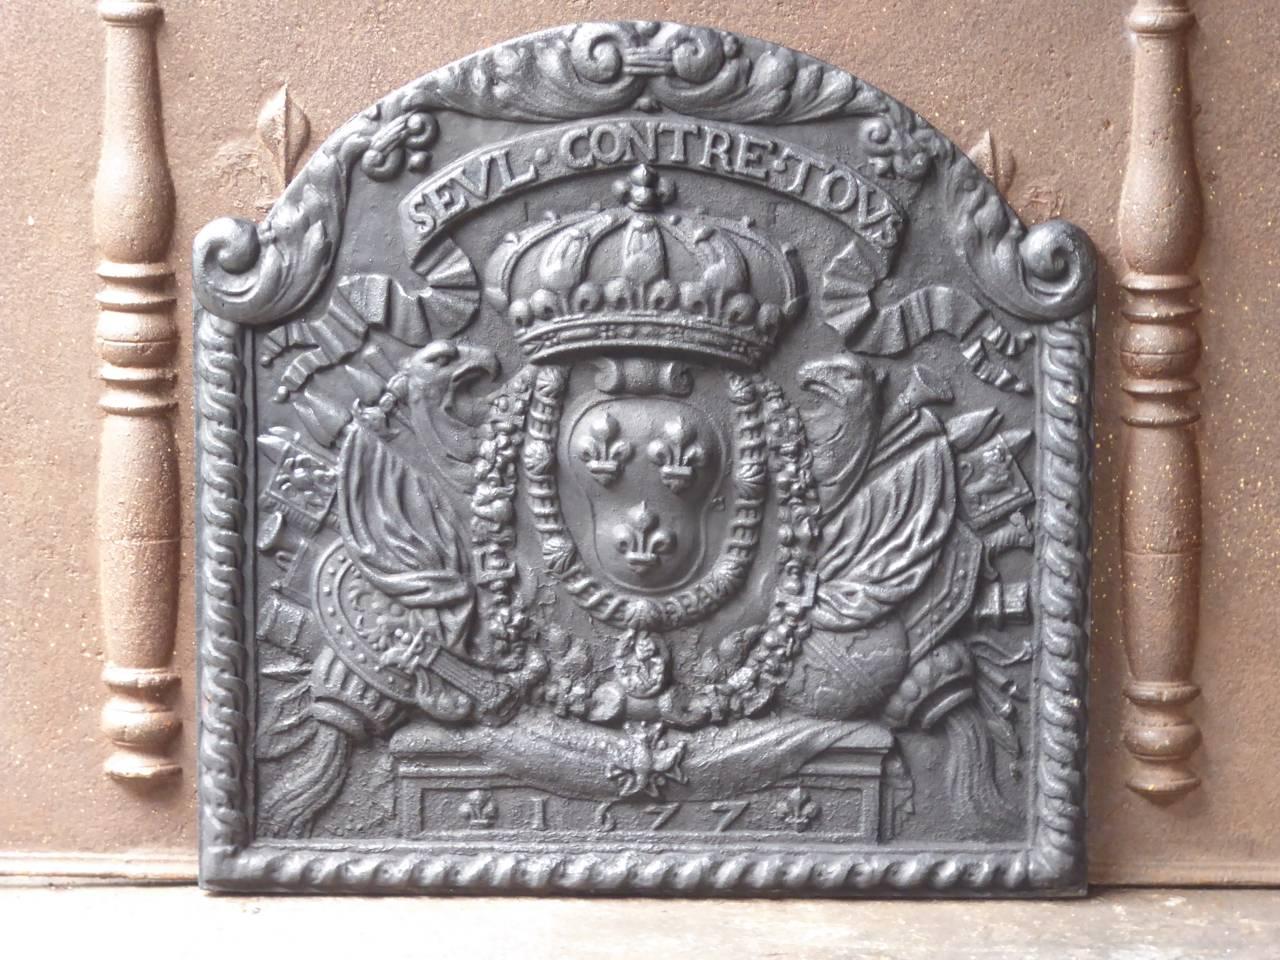 French Louis XIV style 'Seul contre Tous' Fireback. Reminder plate that says 'Seul contre Tous', or 'All Against One'. It symbolizes the French battle against the European coalition at the end of the 17th century. The coalition tried to restrict the